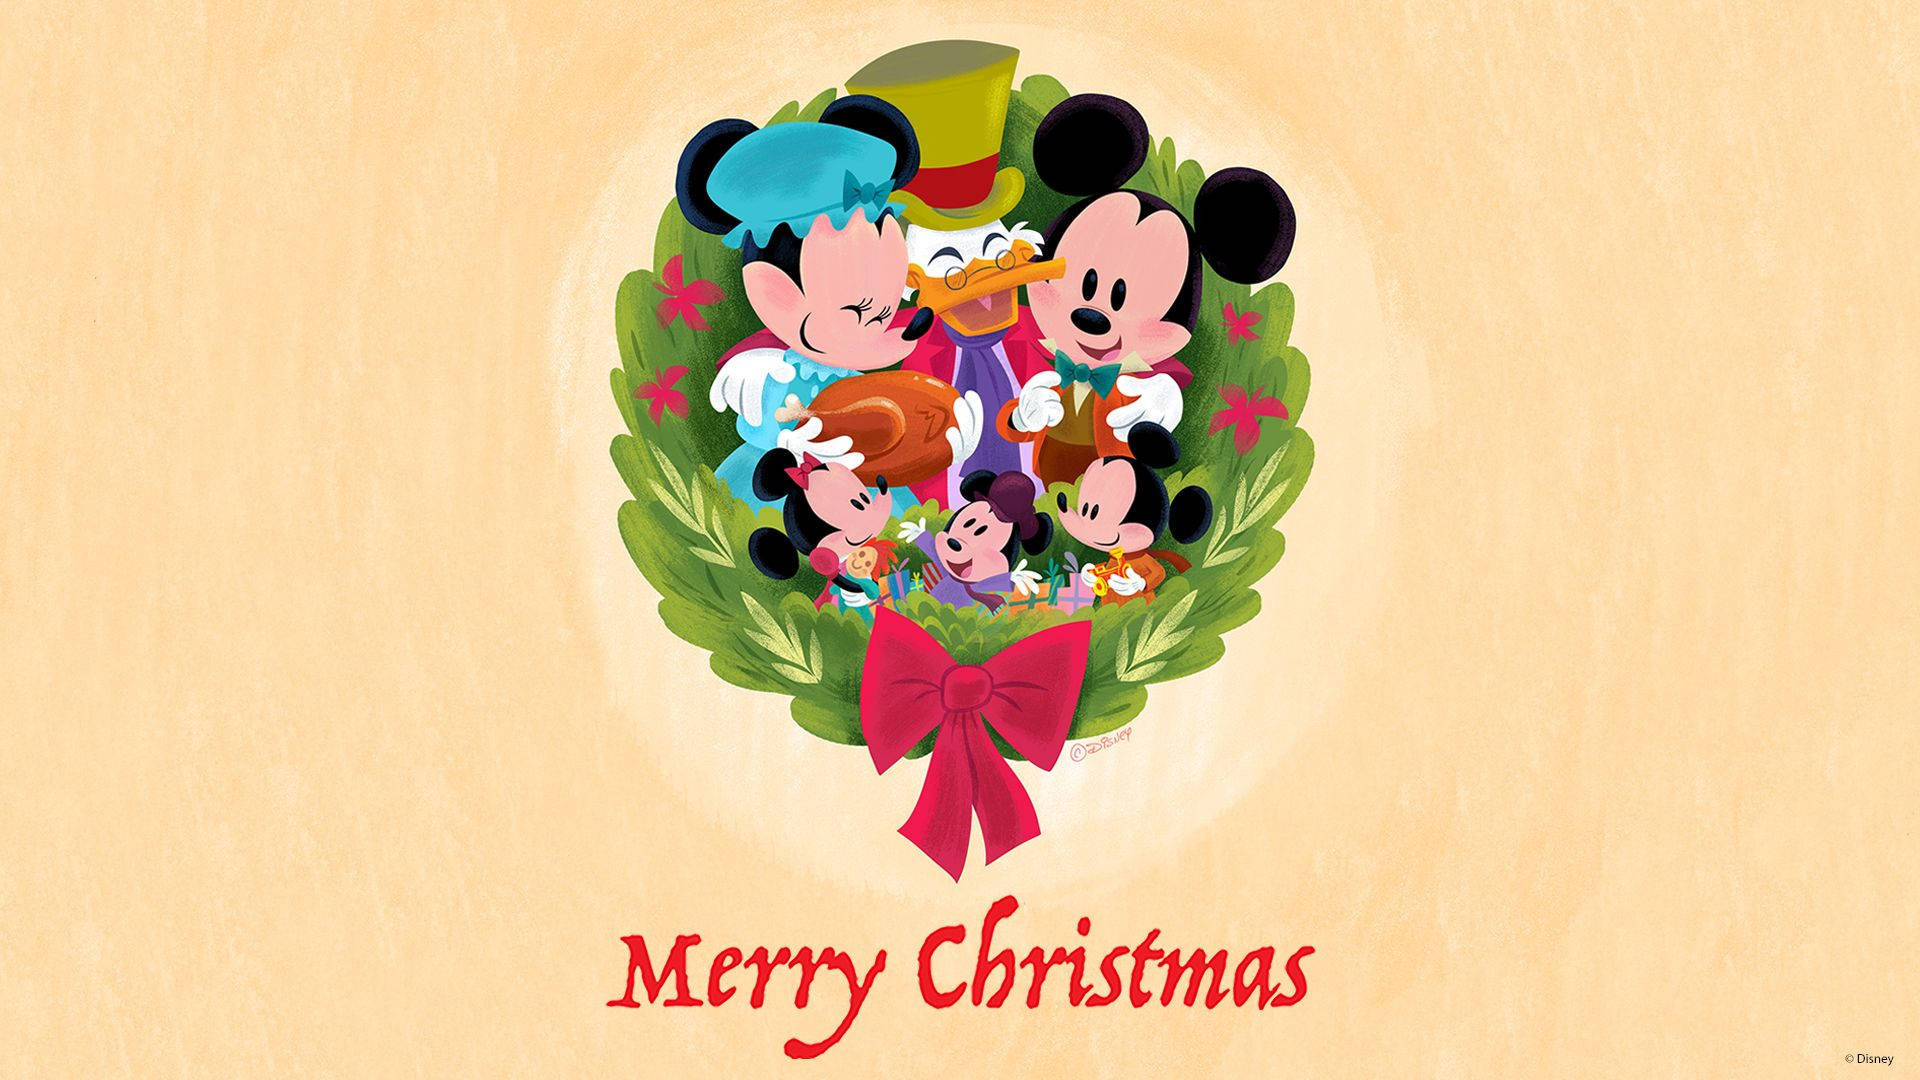 Disney 1920x1080 Hd Mickey Mouse Merry Christmas Wreath Background